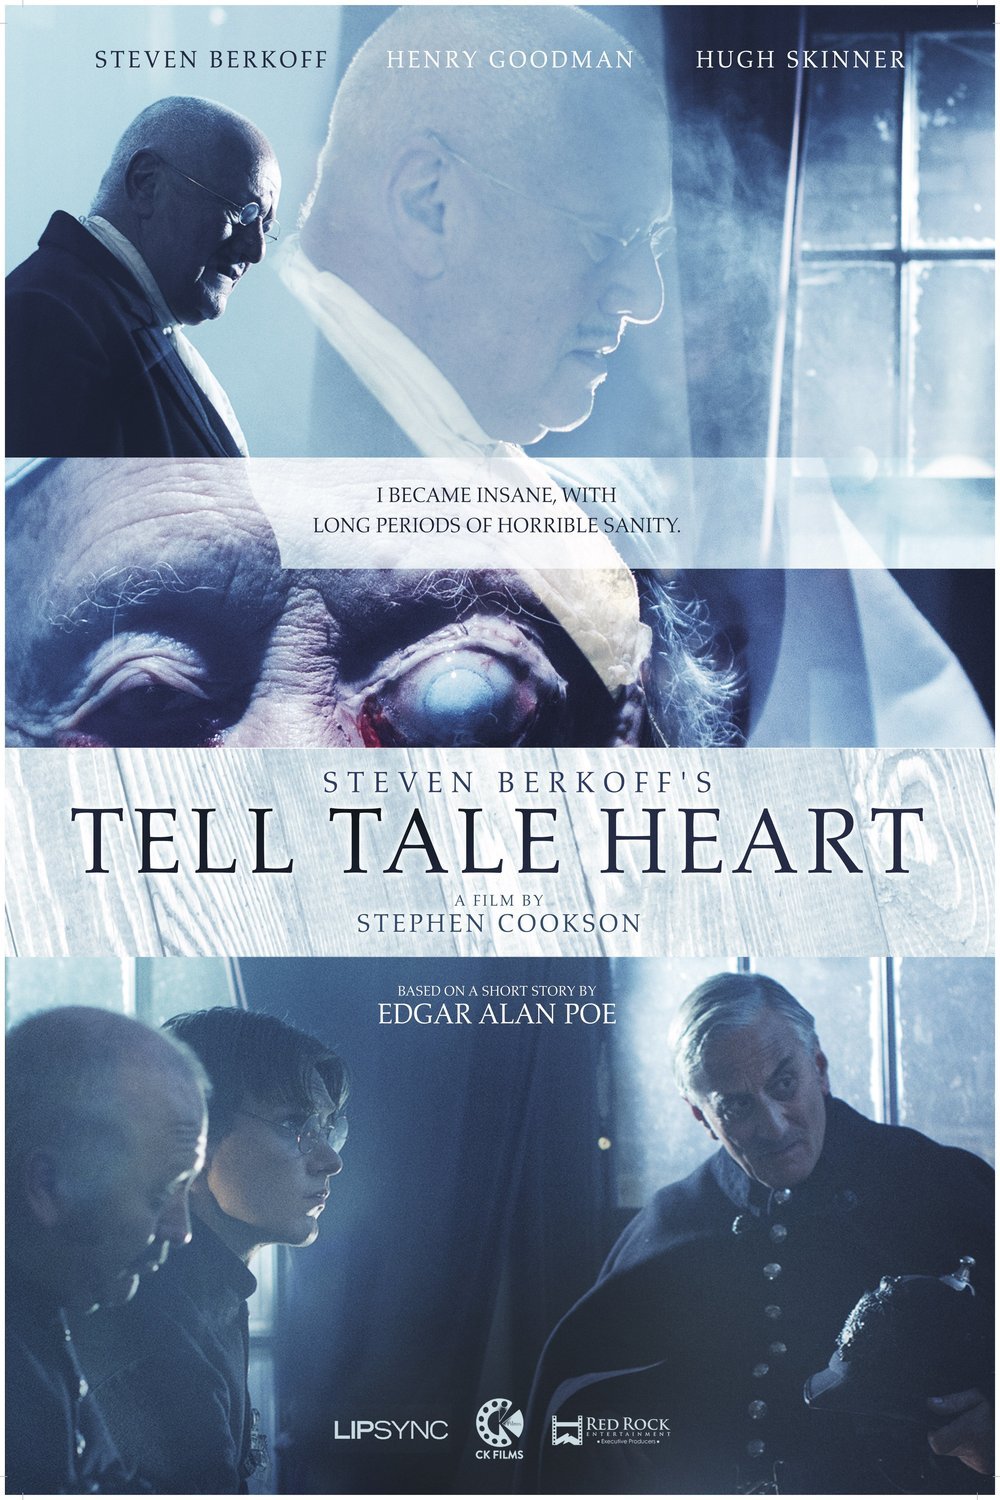 Poster of the movie Steven Berkoff's Tell Tale Heart